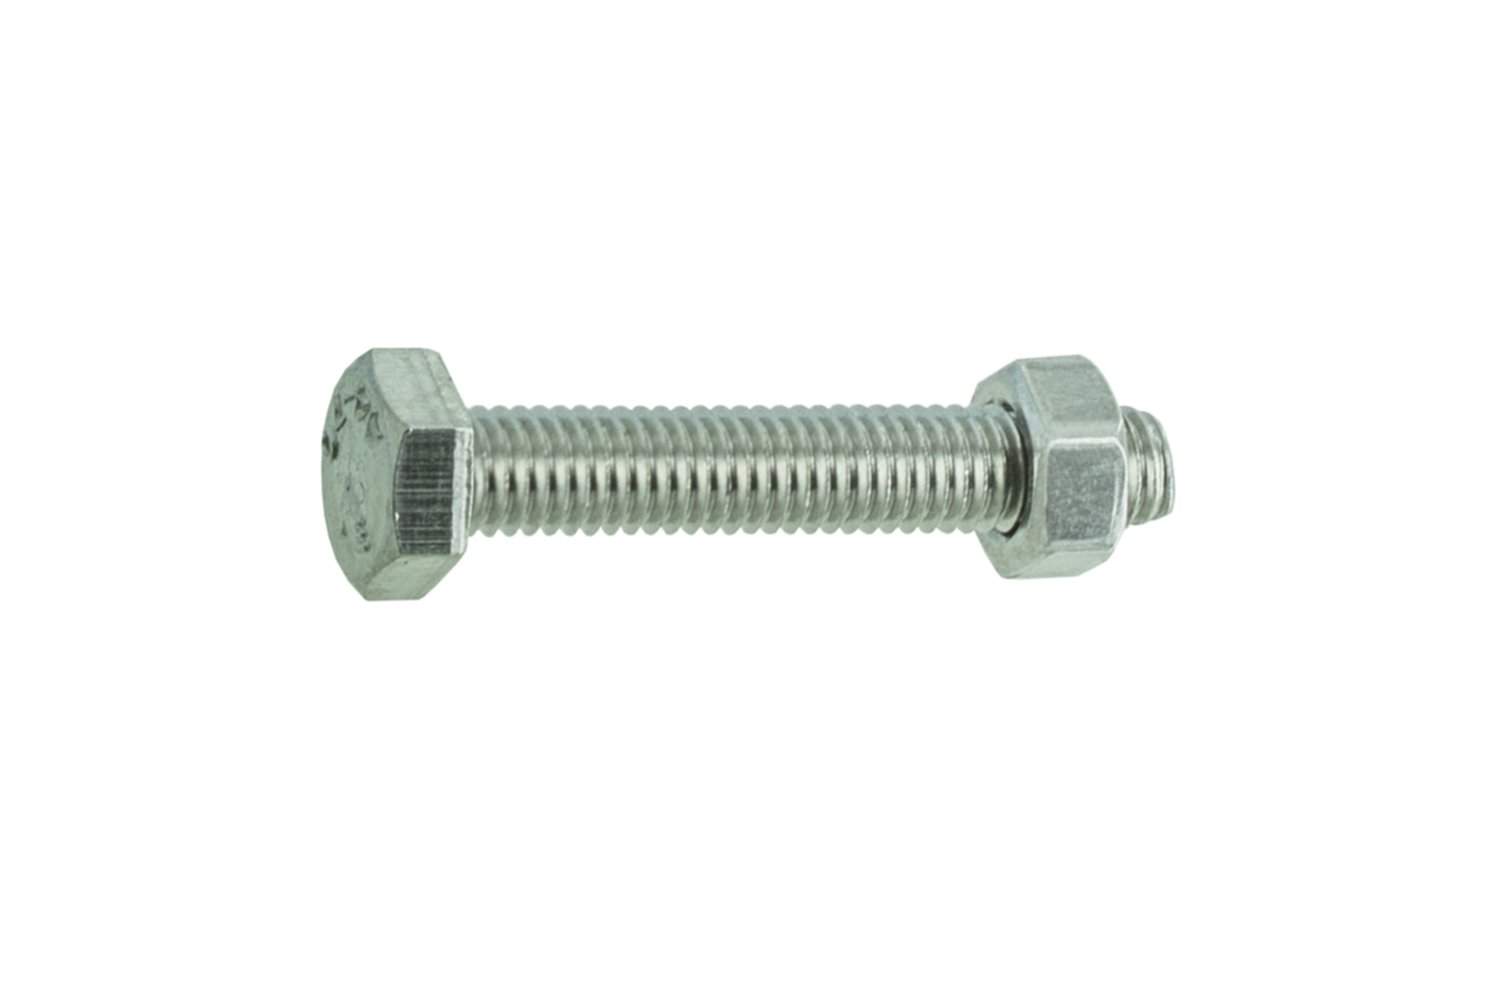 Hex head bolt stainless steel A4 10x40mm, 3 pieces.